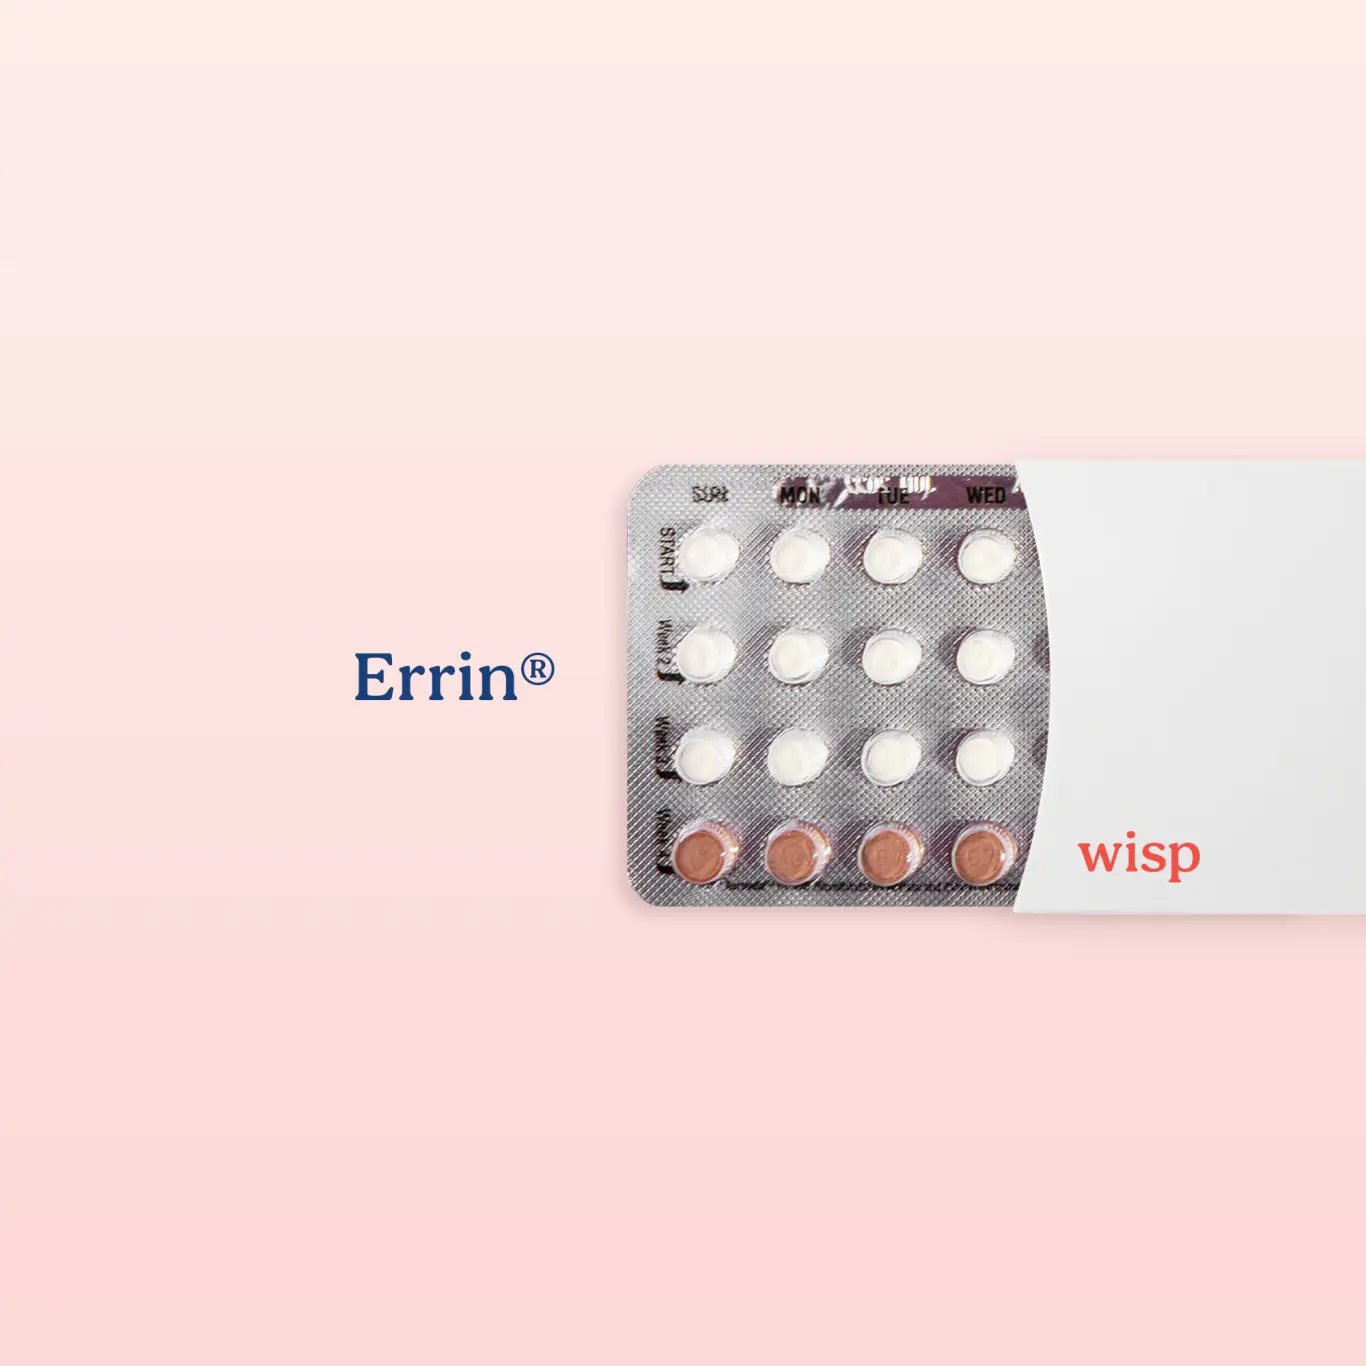 Packet of Errin birth control pills on a pink background